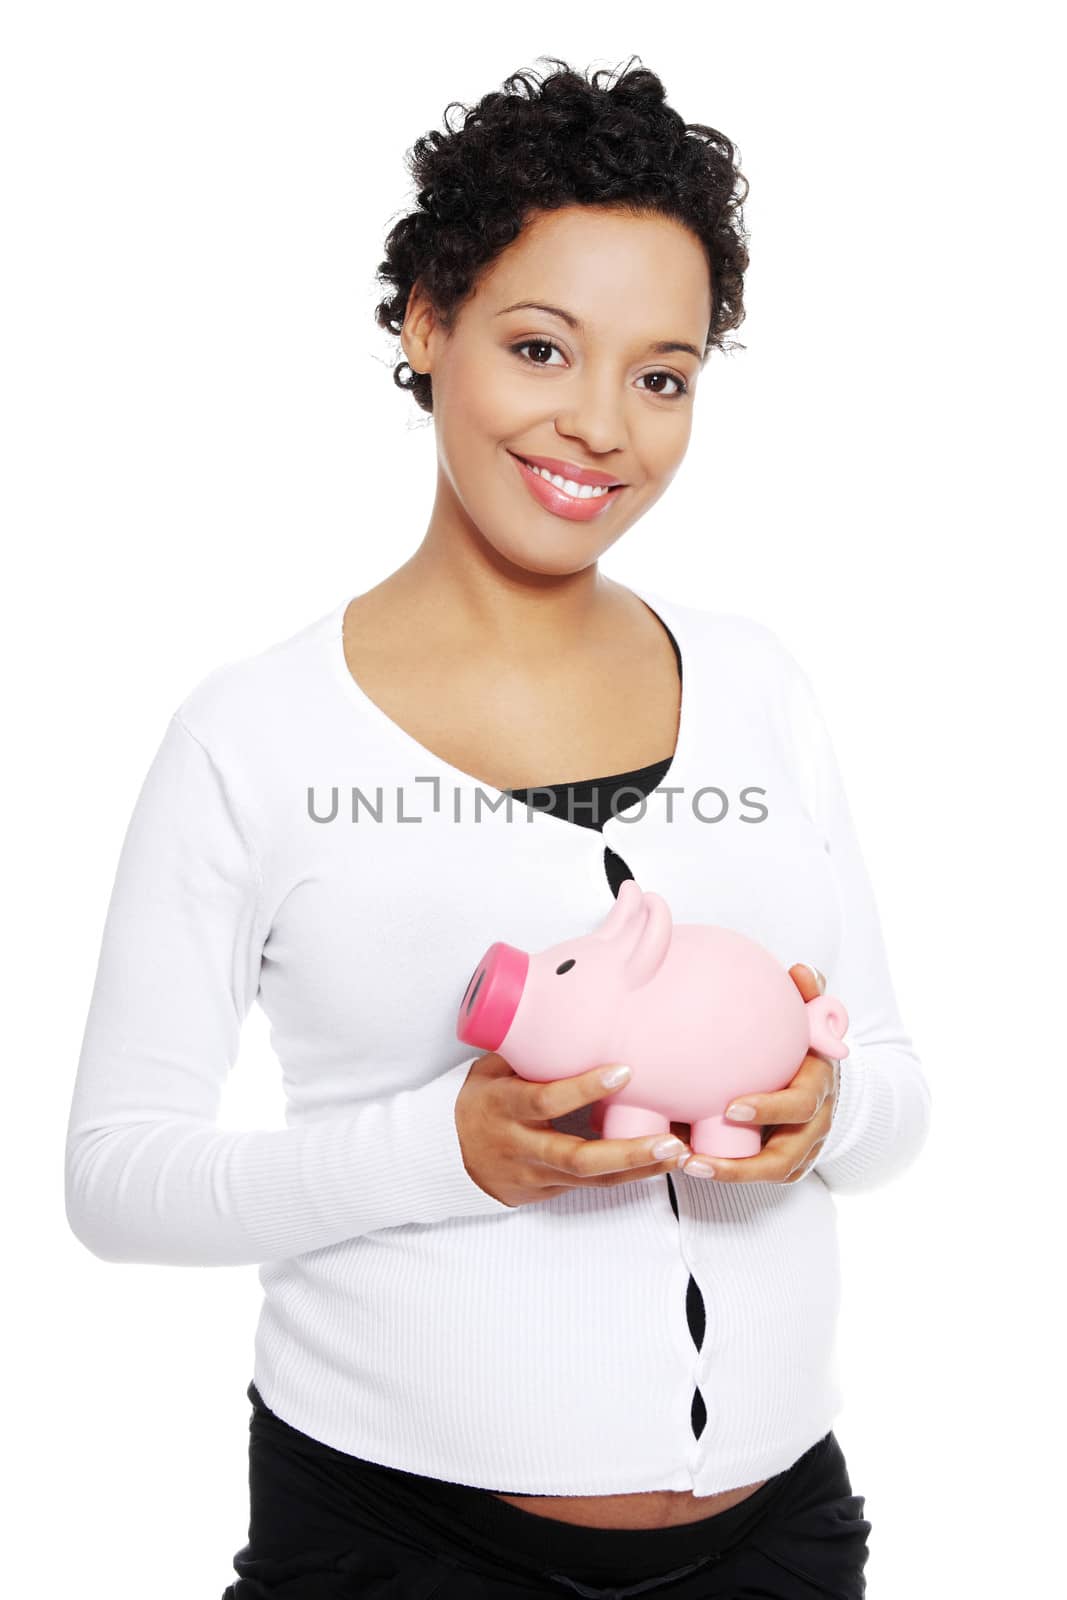 Pregnant woman holding piggy bank , isolated on white background